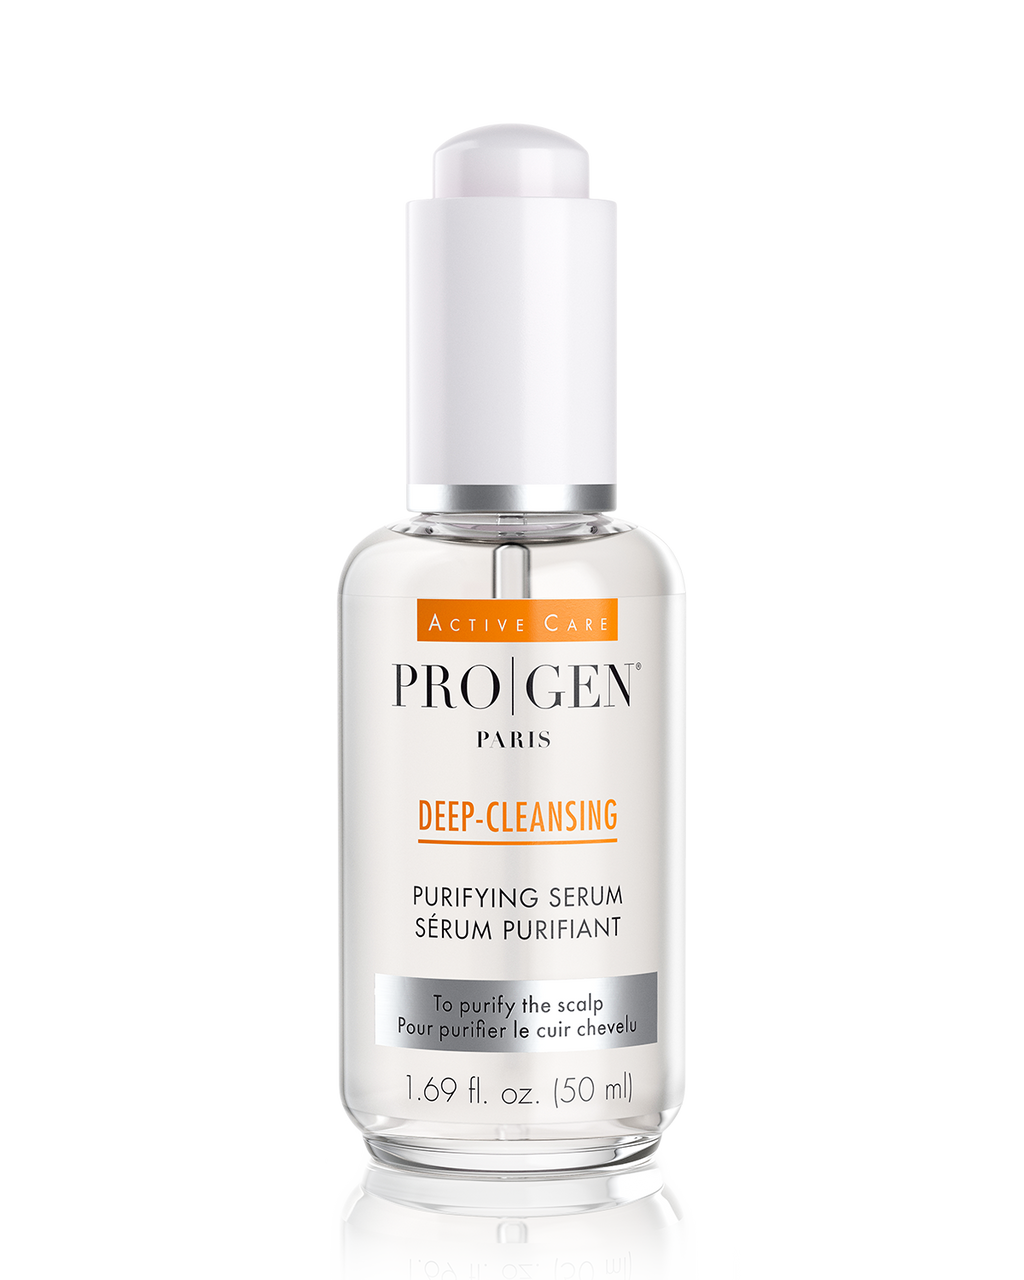 Deep-Cleansing Purifying Serum for Dry, Flaky Scalp